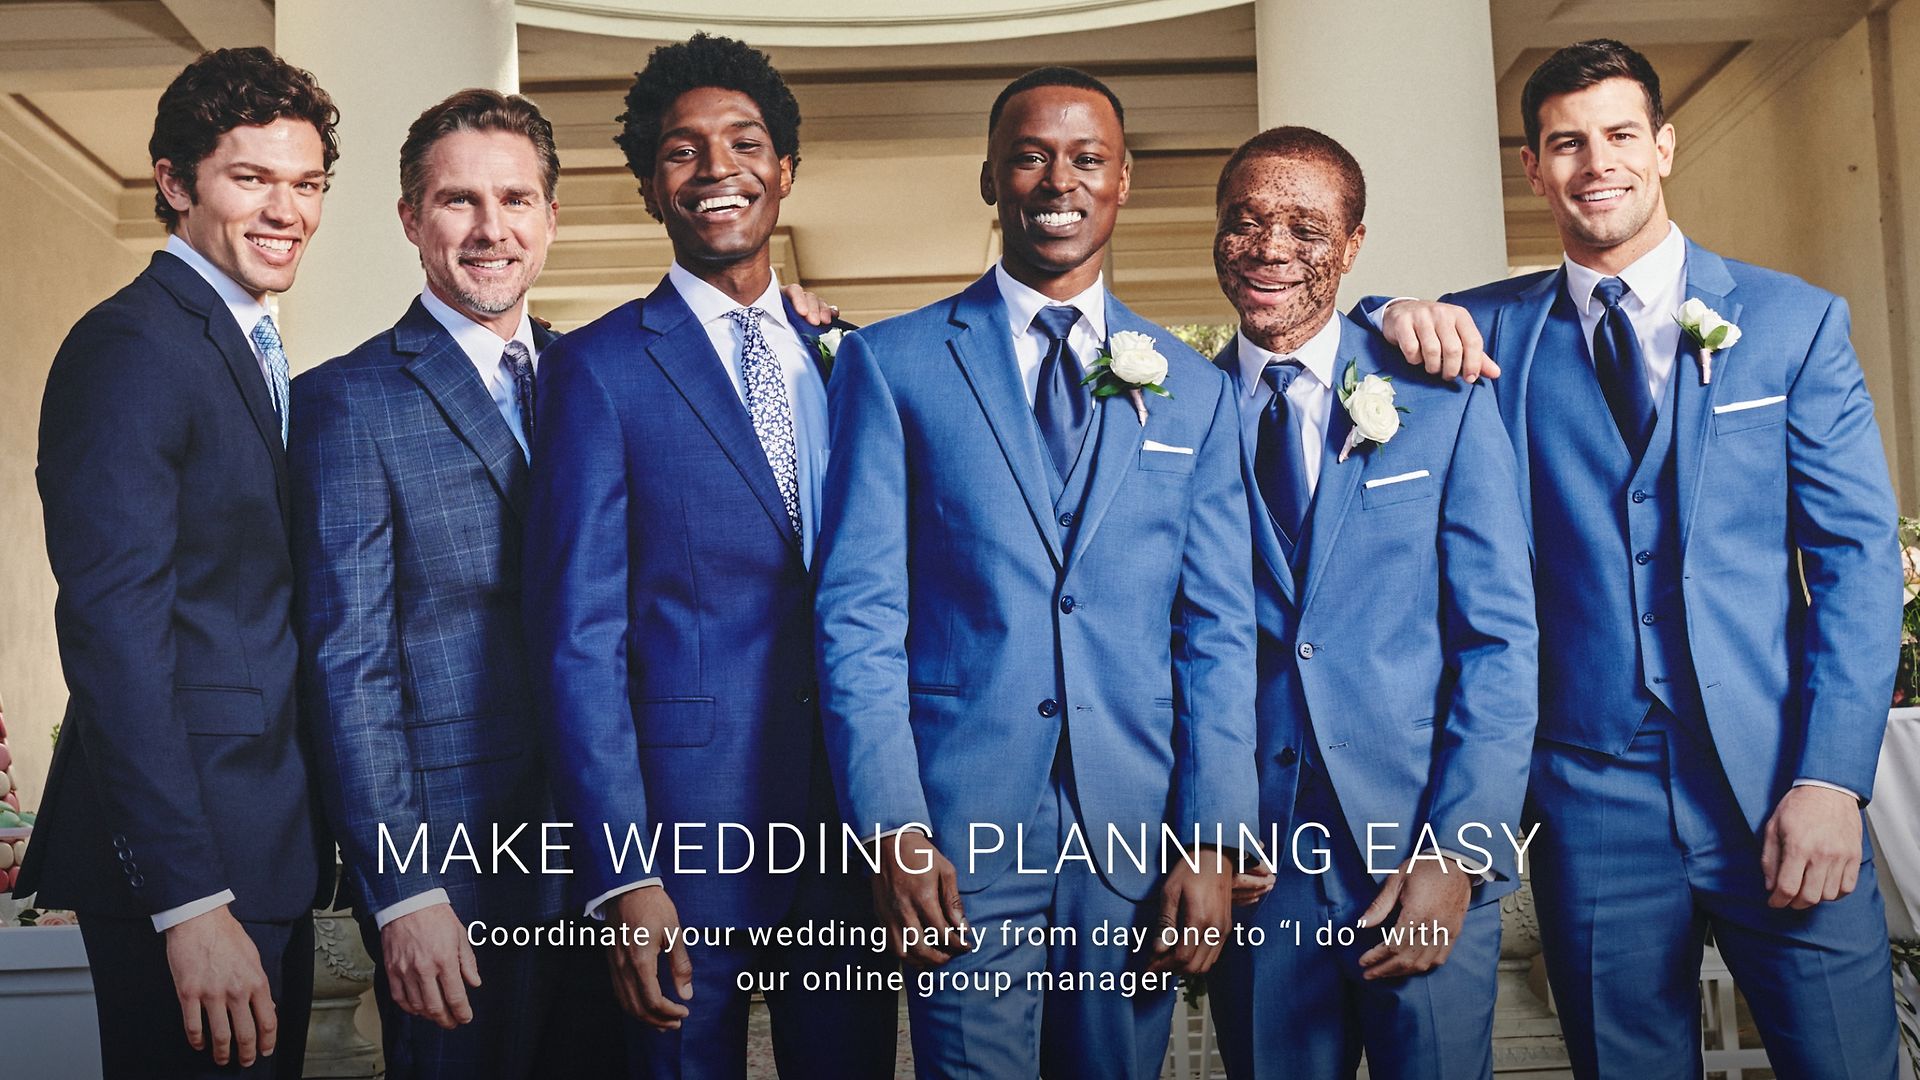 Wedding Suits for the Whole Group